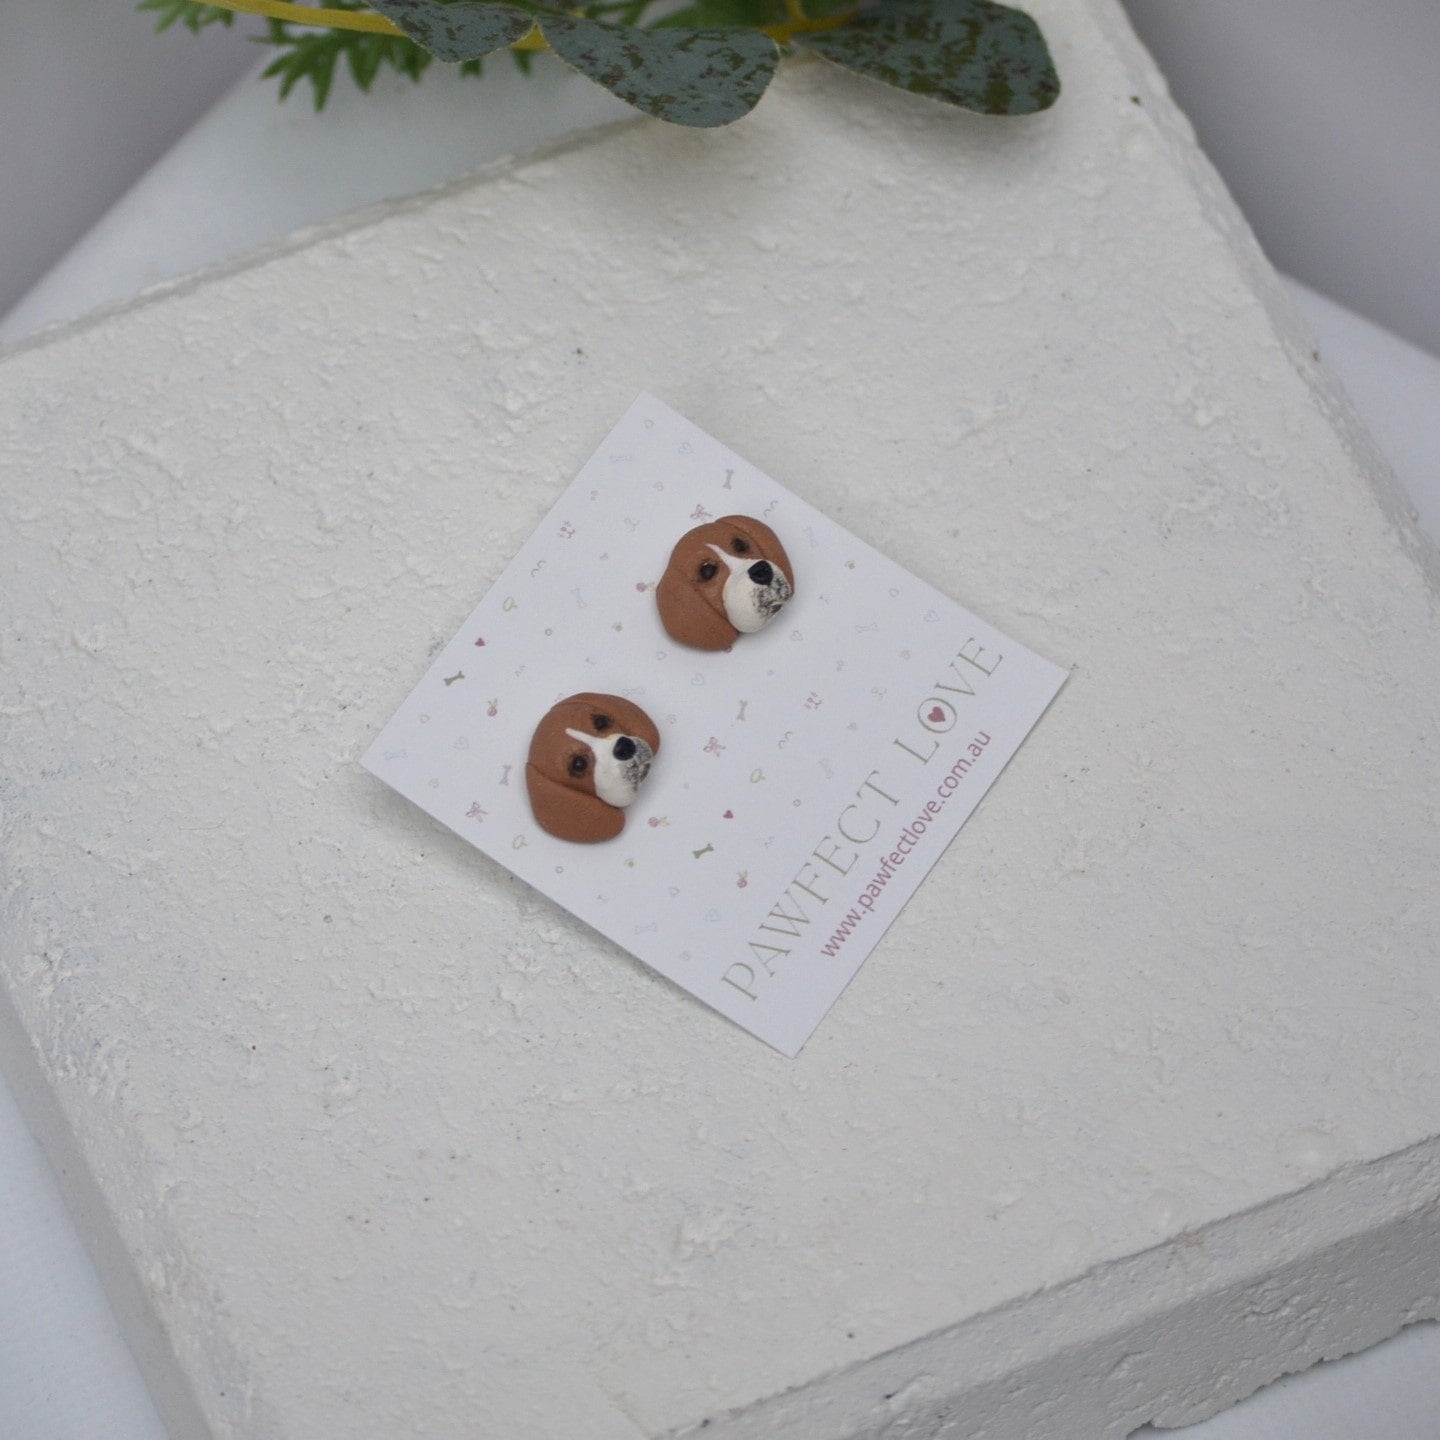 Handmade beagle stud earrings by Pawfect Love, positioned in front of white paver